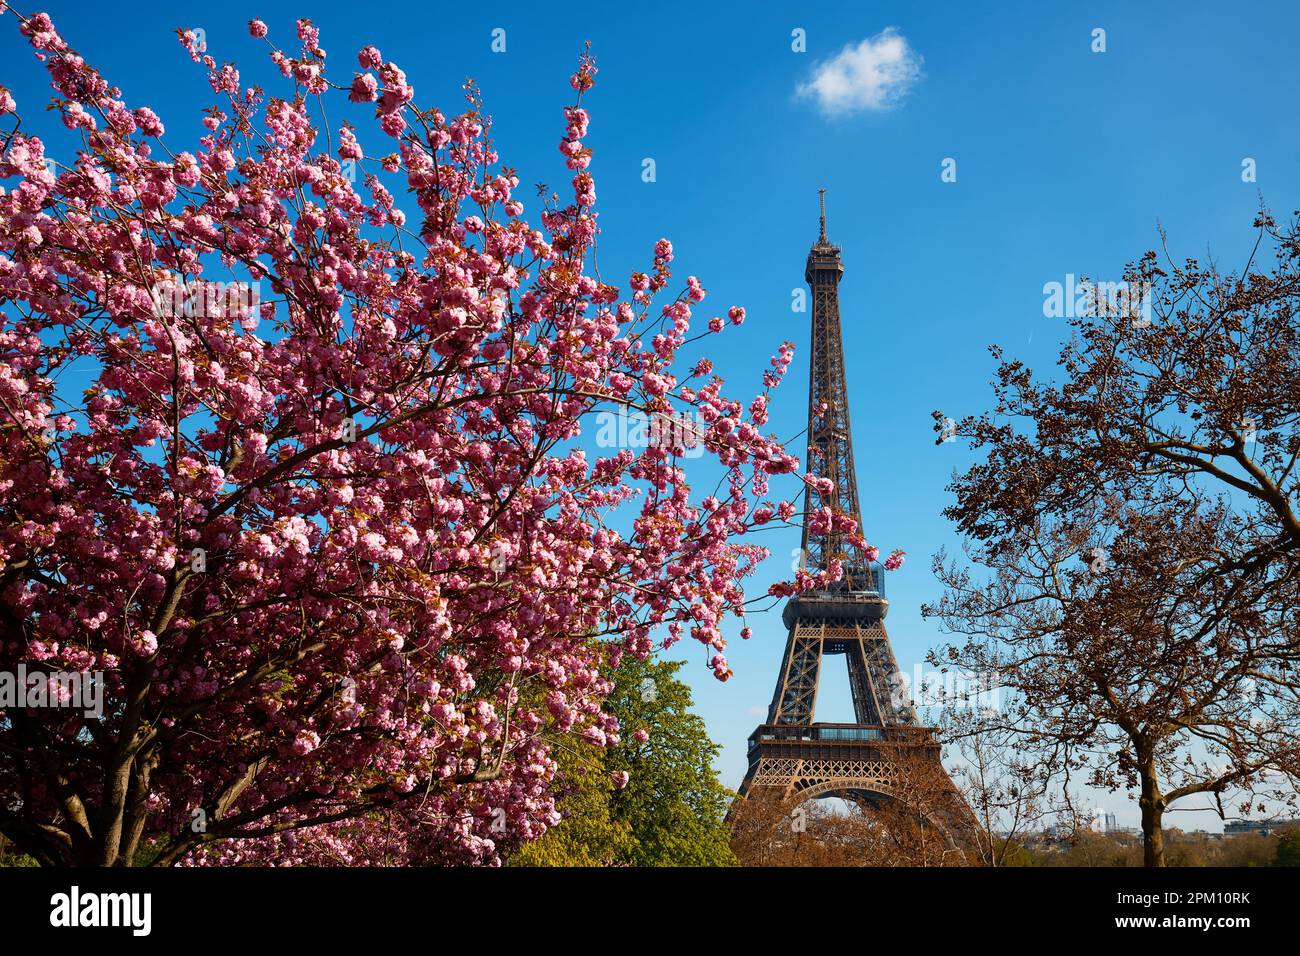 Cherry blossom flowers in full bloom with Eiffel tower in the background. Early spring in Paris, France Stock Photo